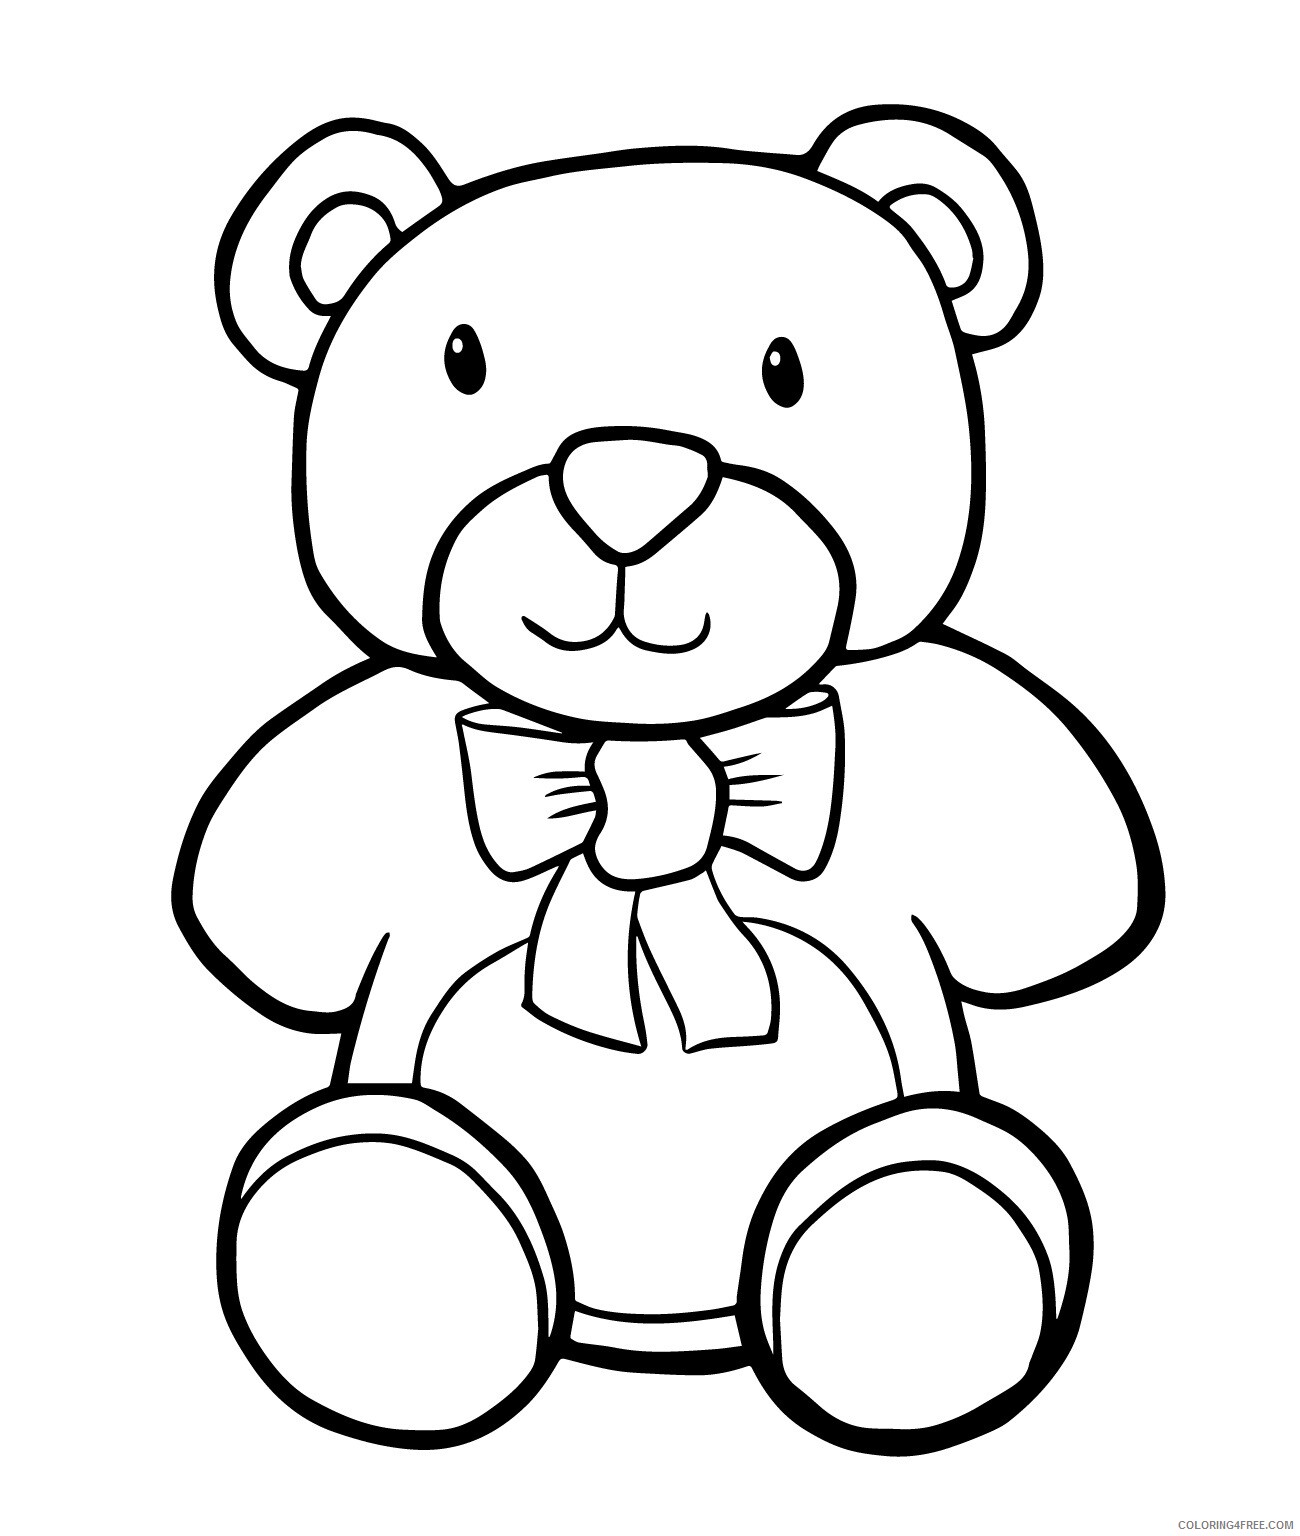 Bear Coloring Pages Animal Printable Sheets Stuffed Bear Toy 2021 0312 Coloring4free